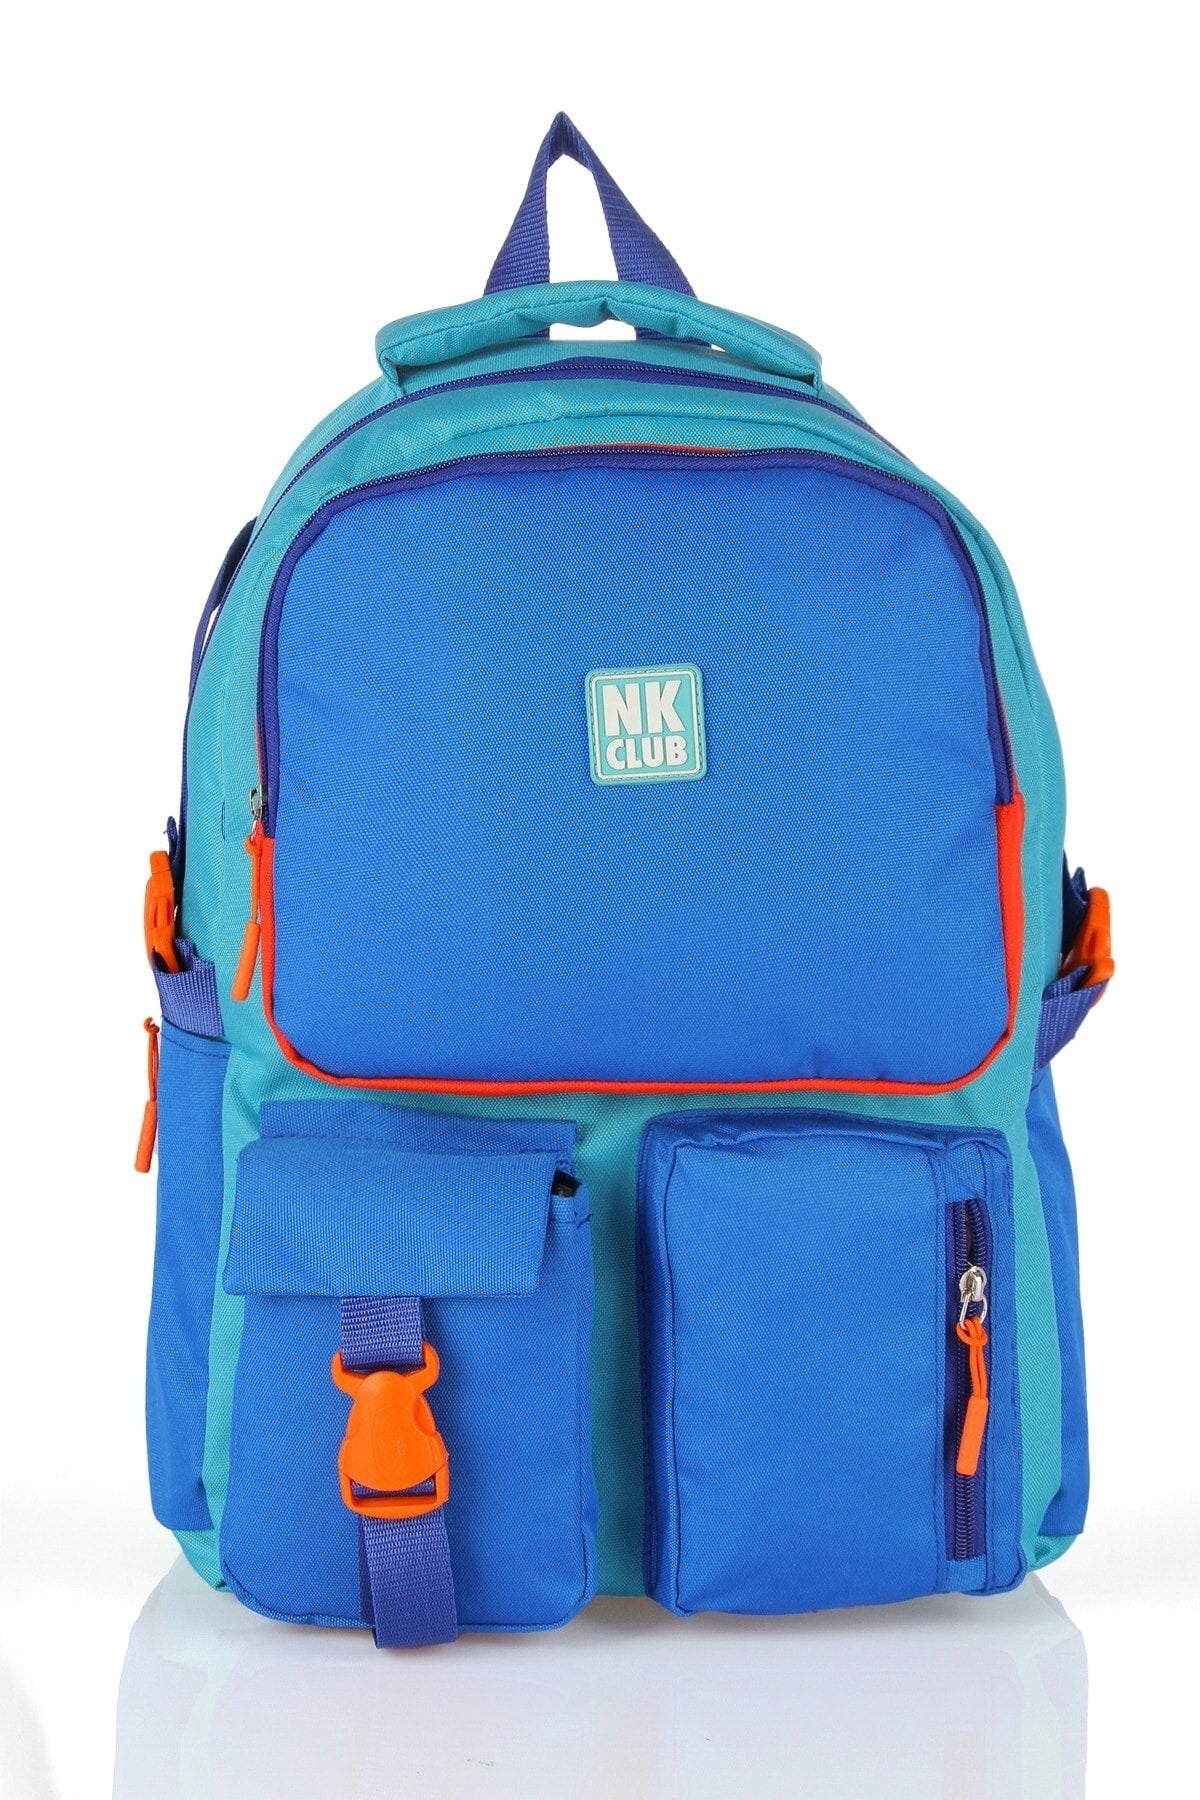 Hkn 9012 Primary School Backpack School Bag Multi Compartment Blue